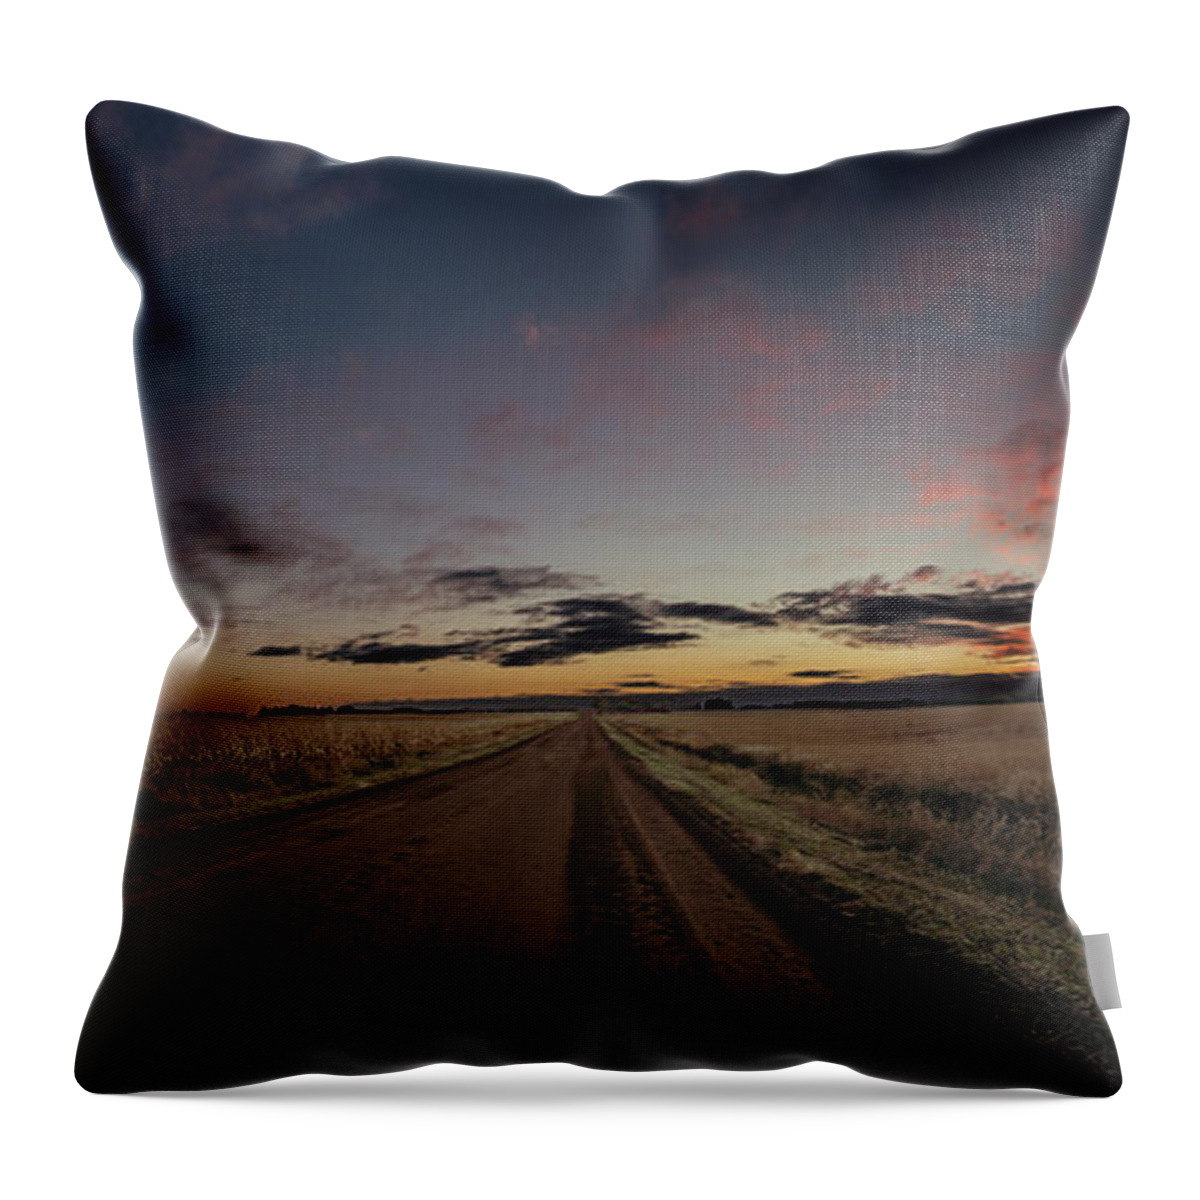 Sunset Throw Pillow featuring the photograph Road Home by Aaron J Groen